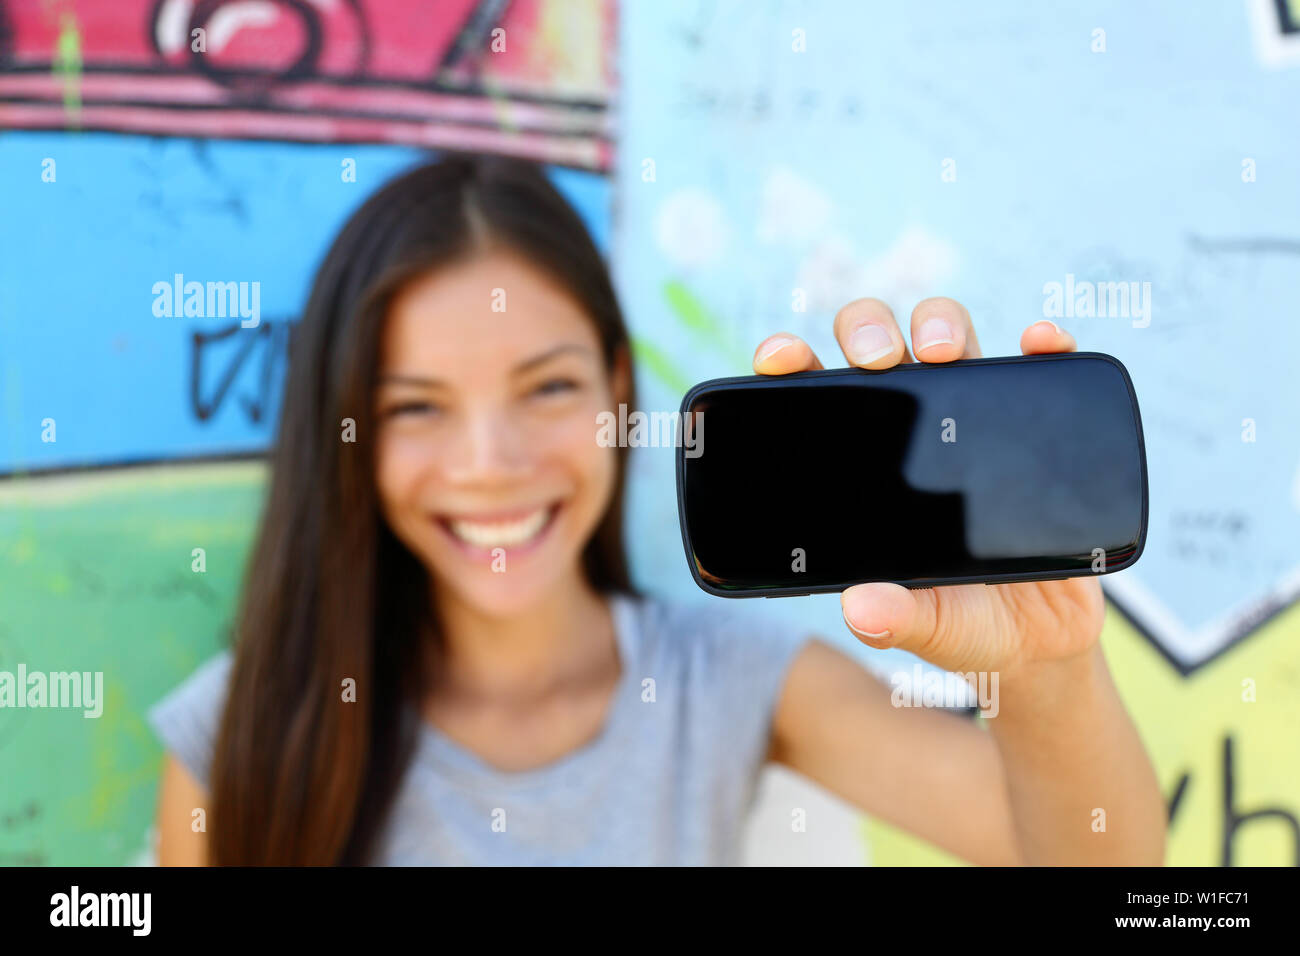 Smartphone - young ethnic woman showing screen for copyspace for text or photo. Asian young adult holding phone with urban graffiti background at Berlin wall, Germany. Stock Photo